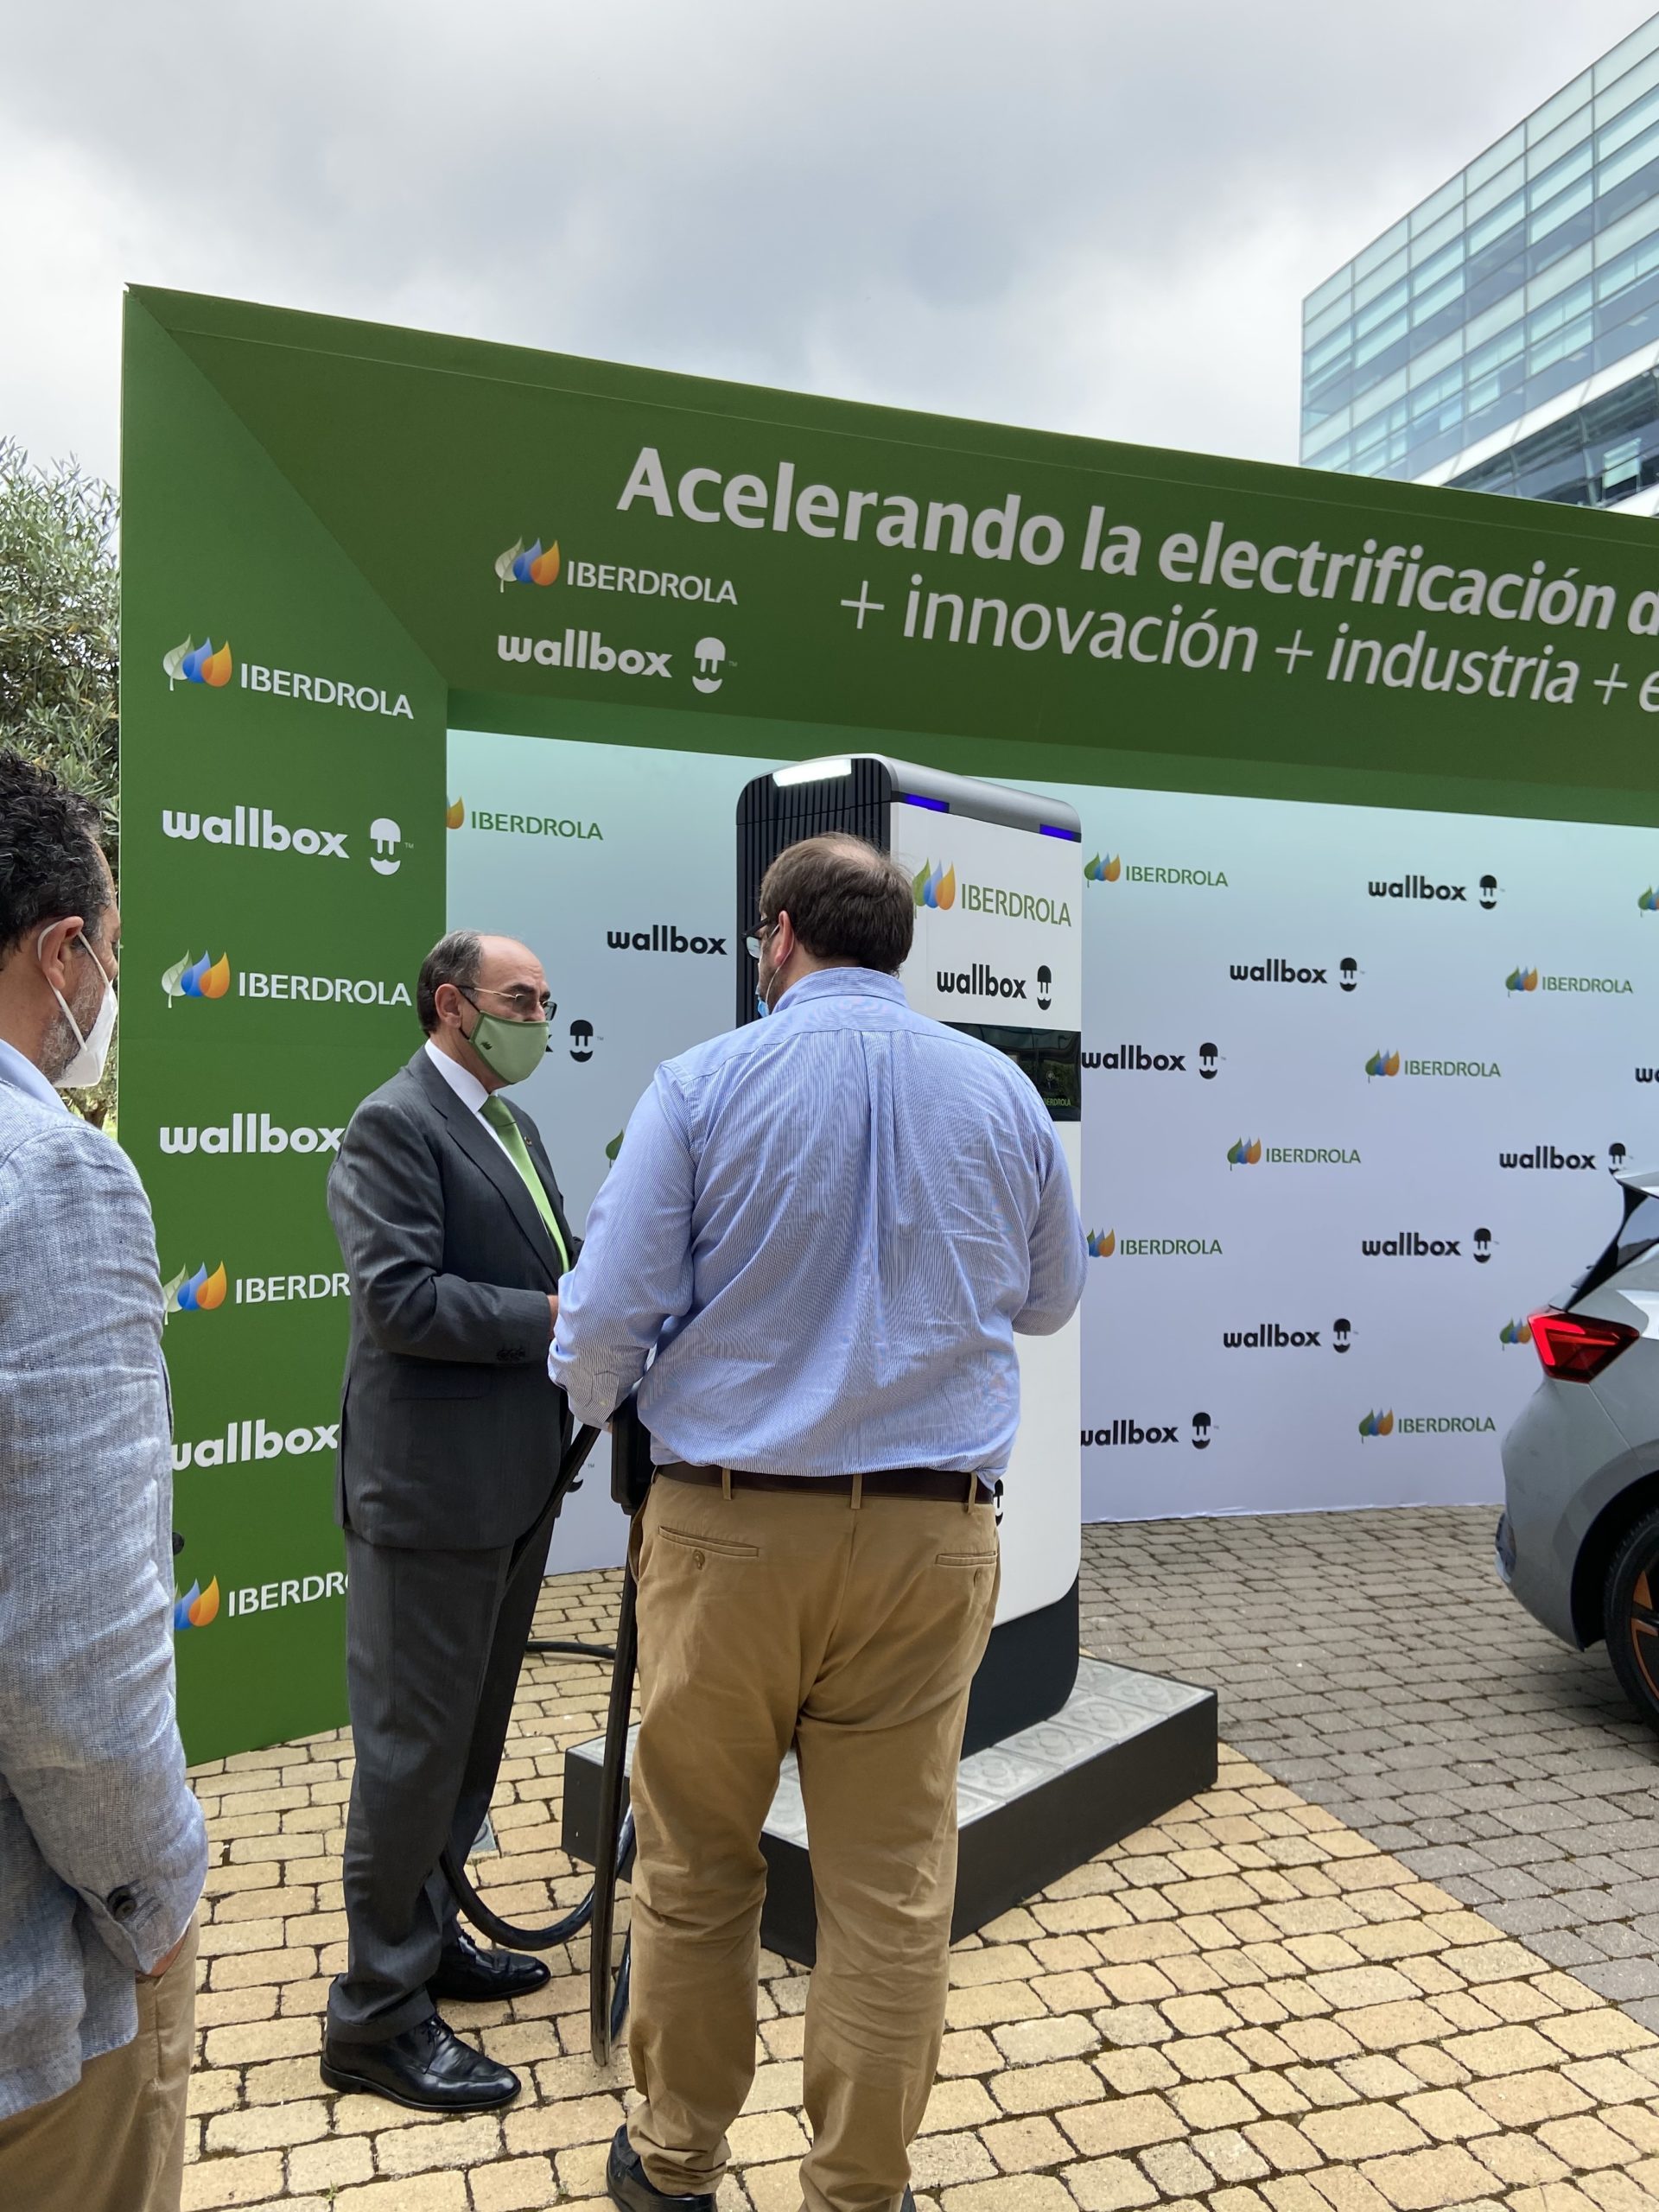 Iberdrola plan to install more than 150,000 chargers 